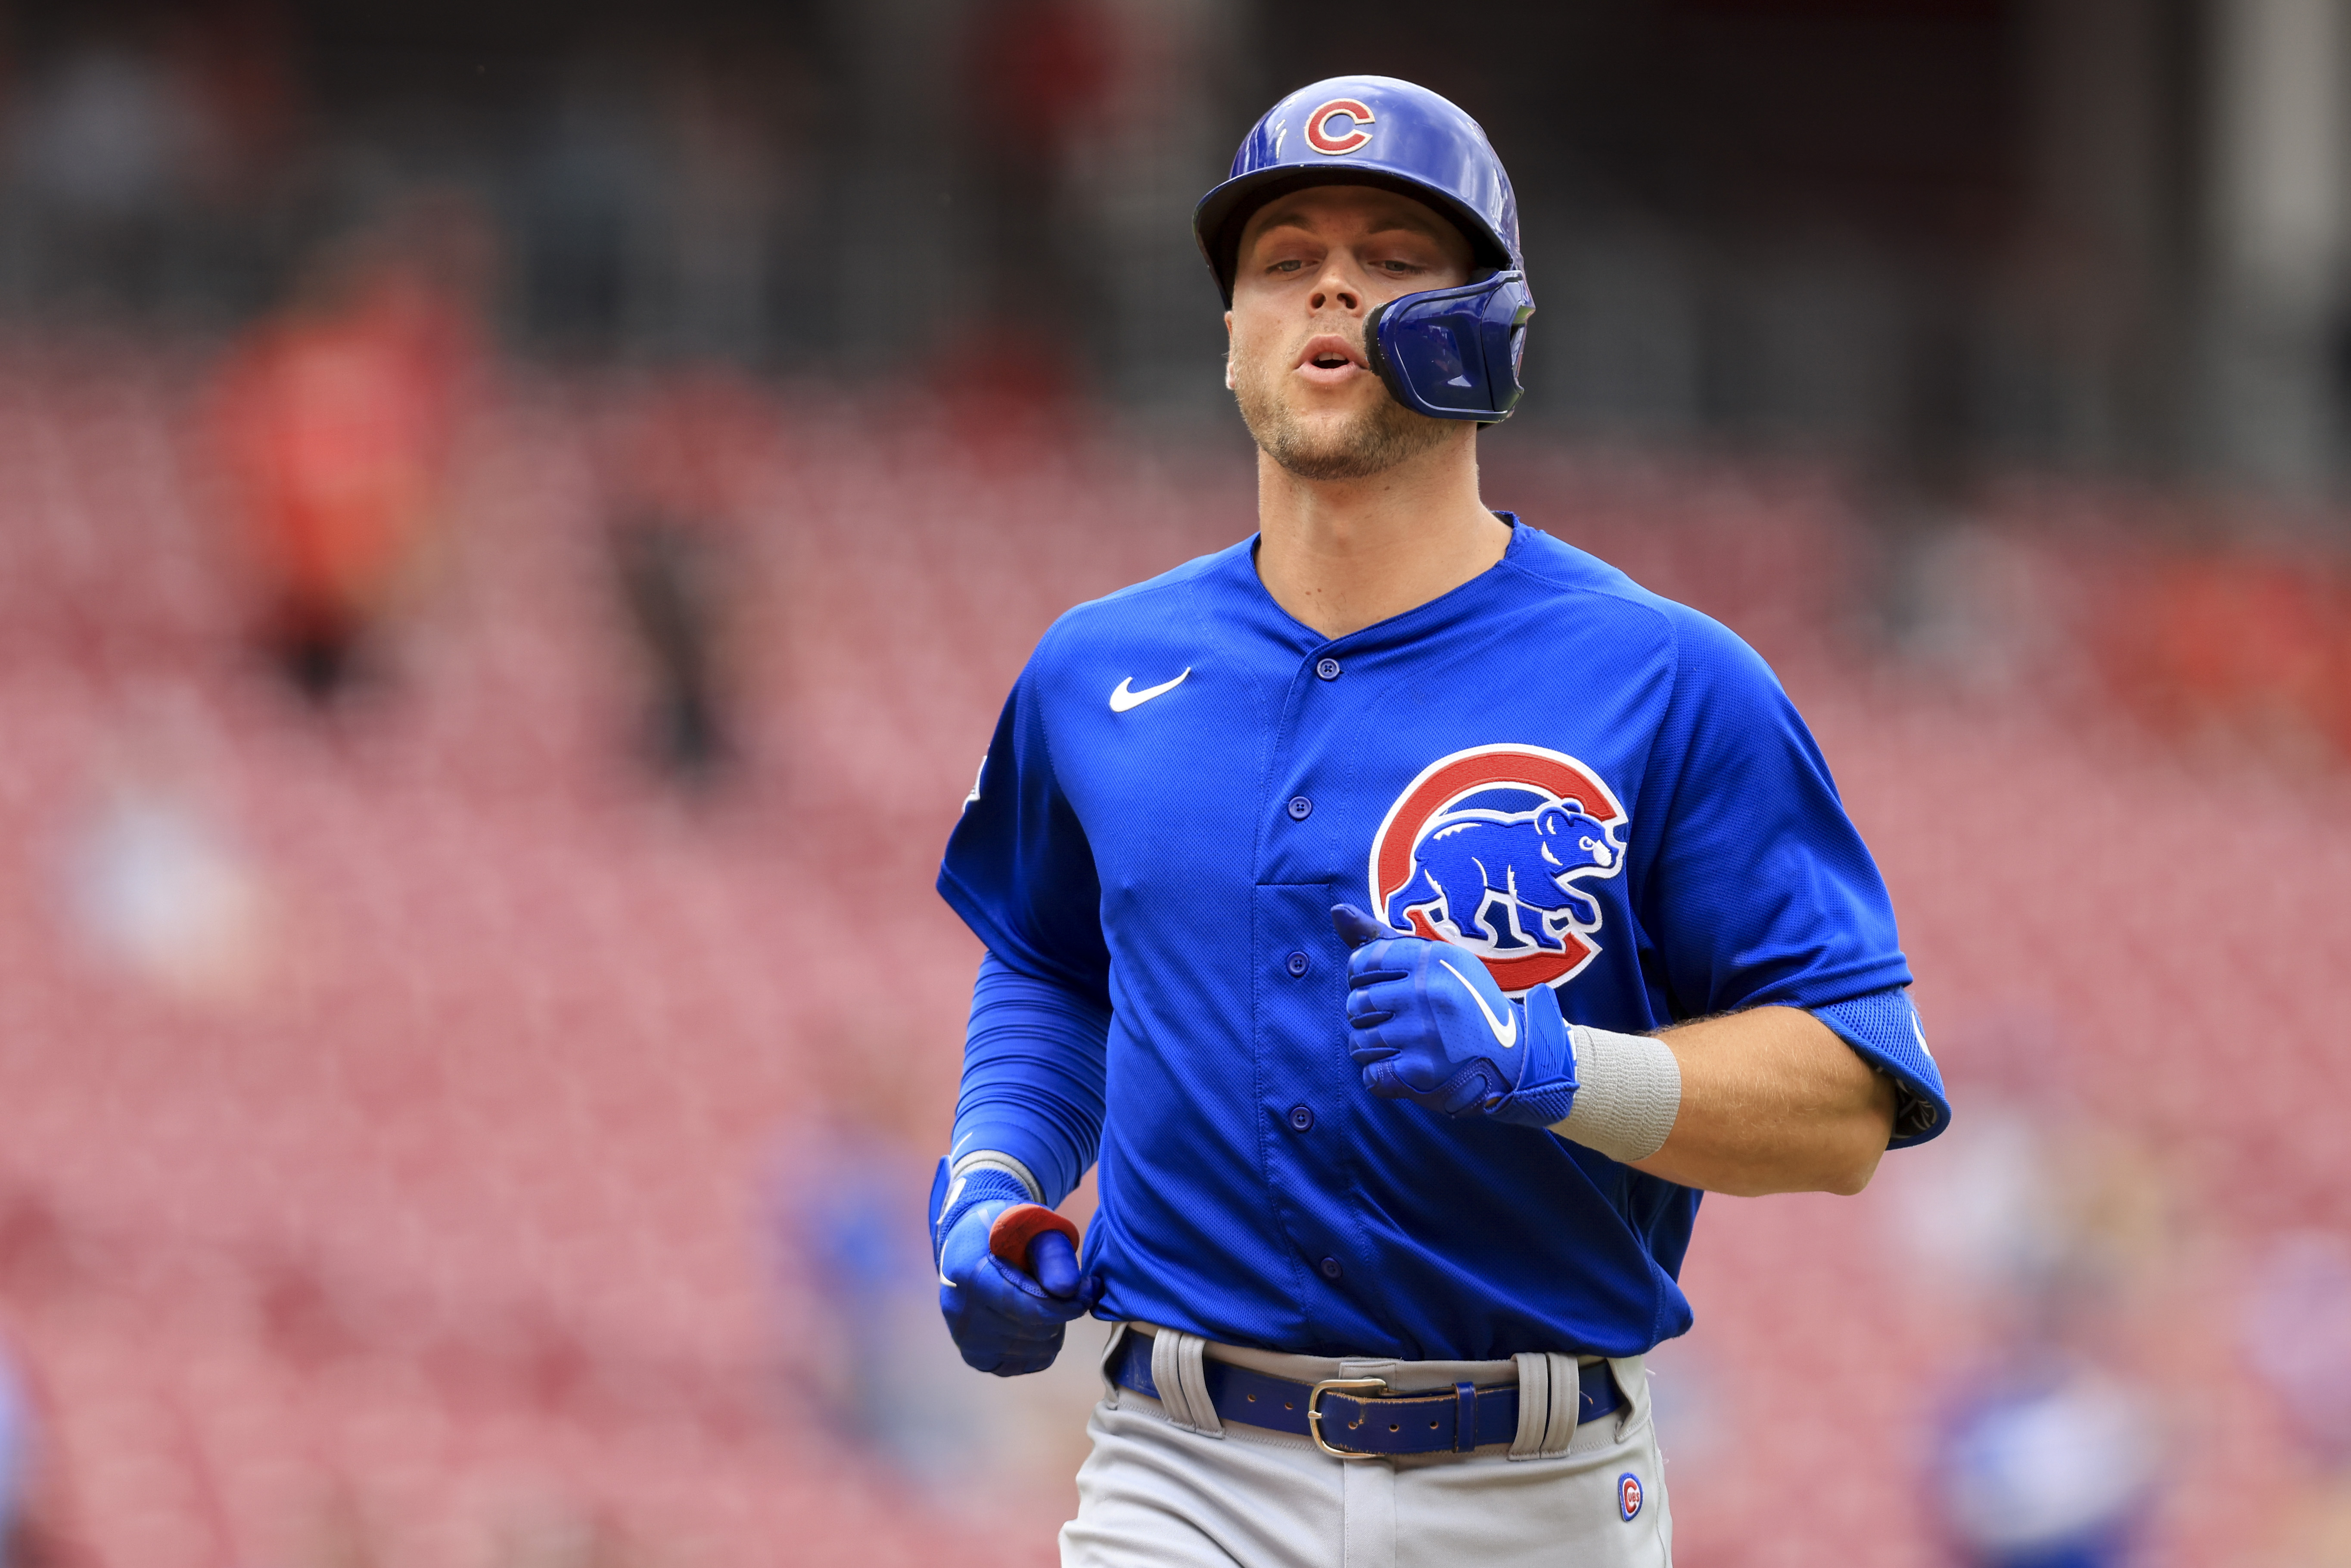 Shortstop Andrelton Simmons makes first start with Cubs to open